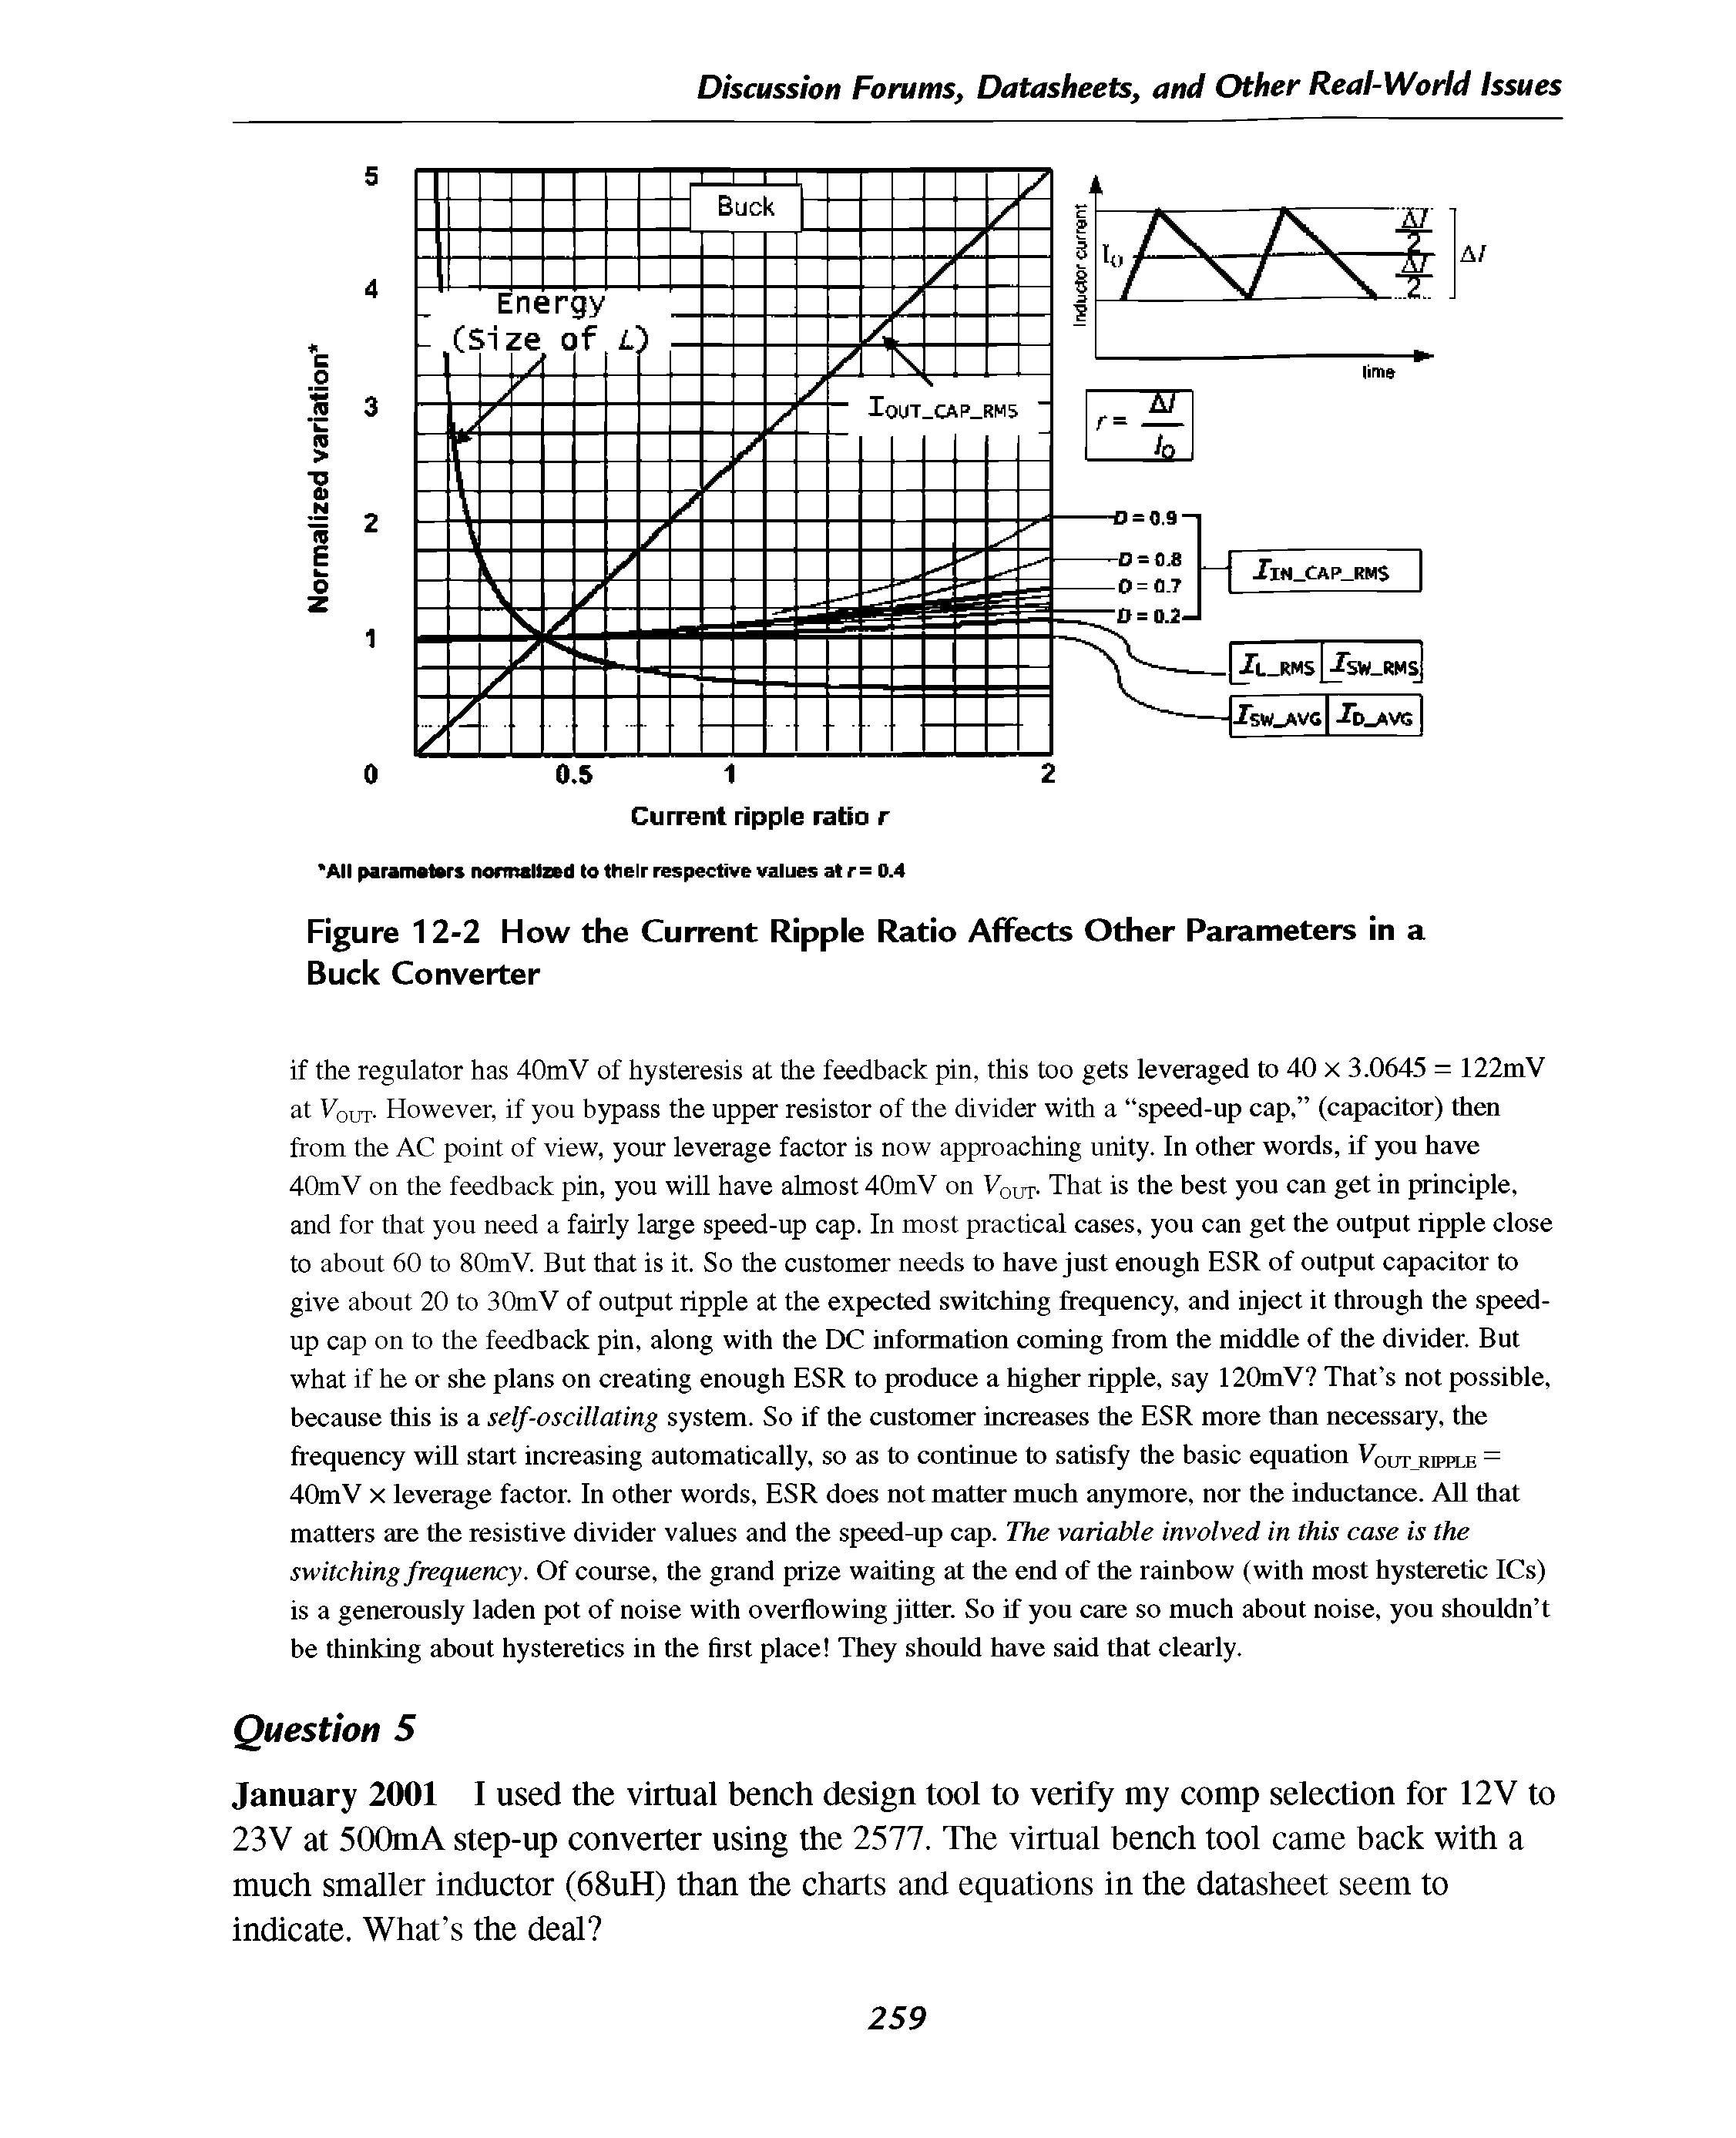 Figure 12-2 How the Current Ripple Ratio Affects Other Parameters in a Buck Converter...